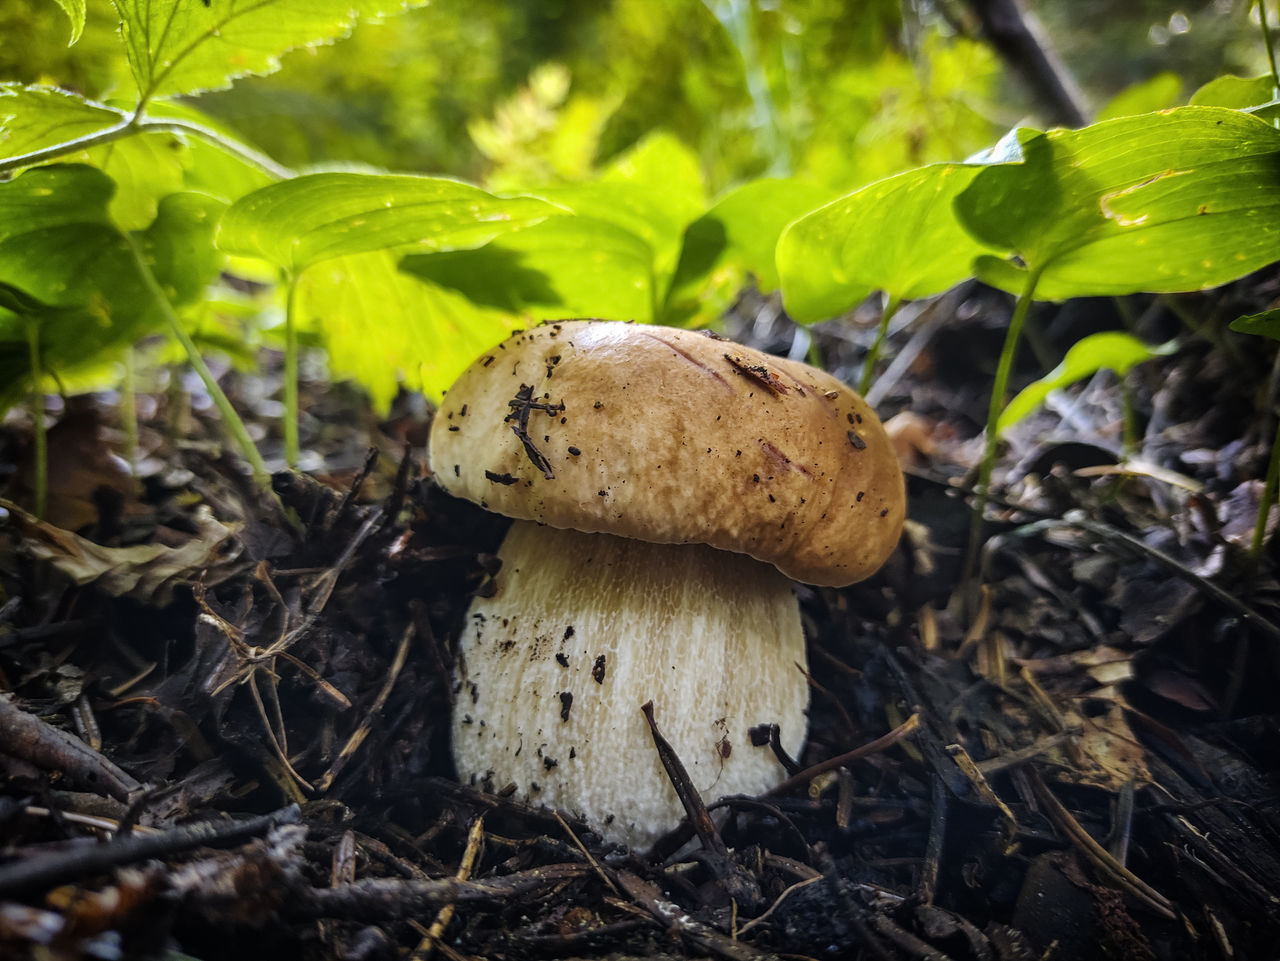 vegetable, mushroom, fungus, food, plant, growth, land, nature, tree, forest, food and drink, woodland, plant part, leaf, penny bun, close-up, bolete, toadstool, no people, field, beauty in nature, soil, freshness, edible mushroom, agaricaceae, day, outdoors, focus on foreground, green, fragility, autumn, healthy eating, agaricus